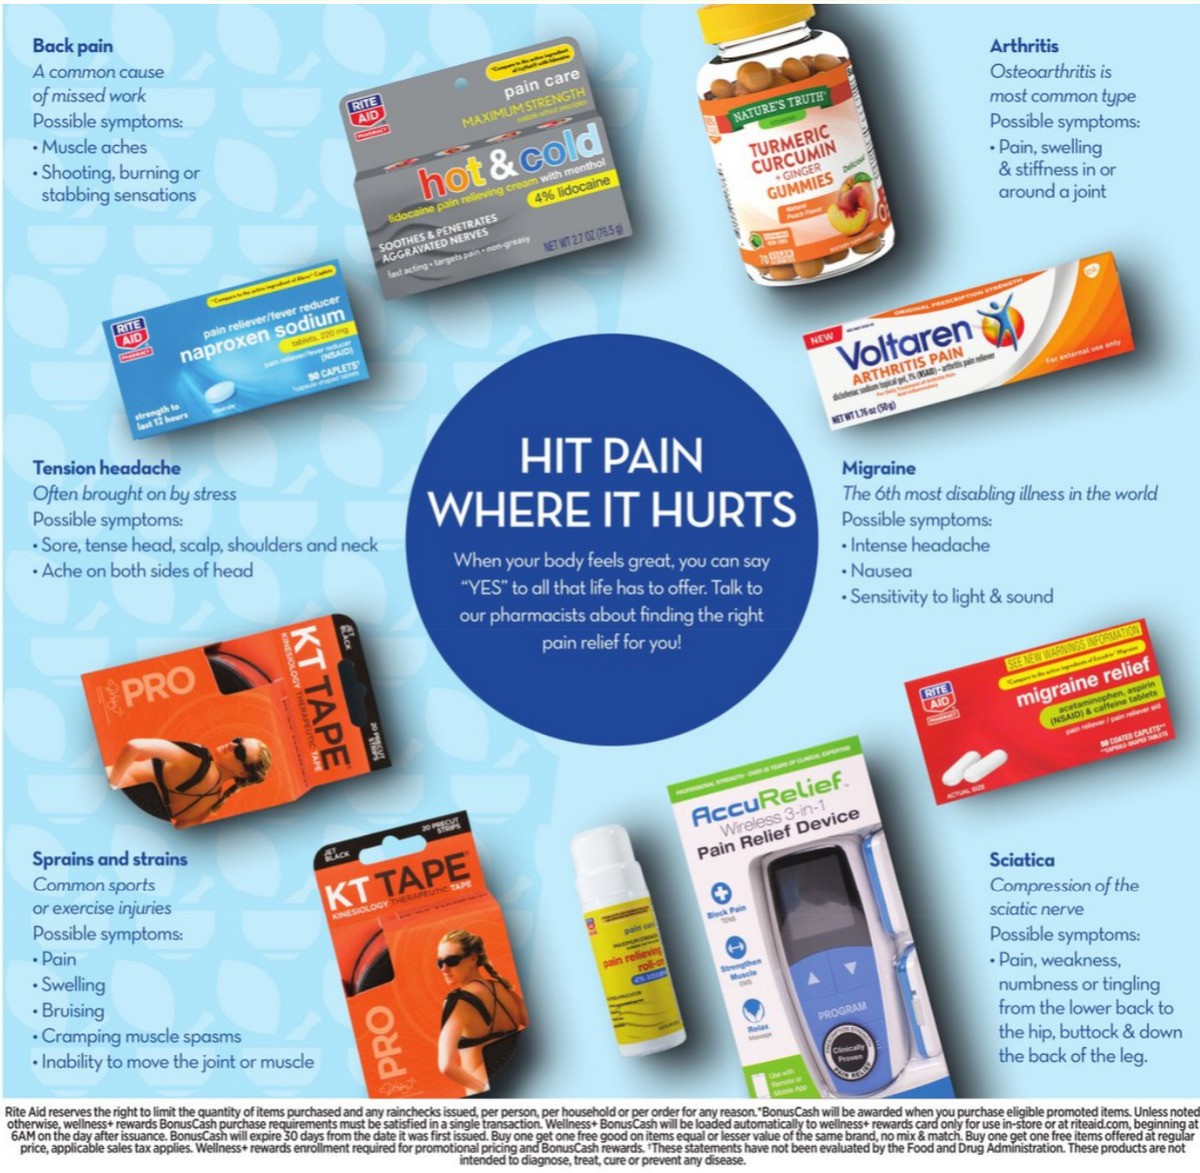 Rite Aid Weekly Ad from April 11